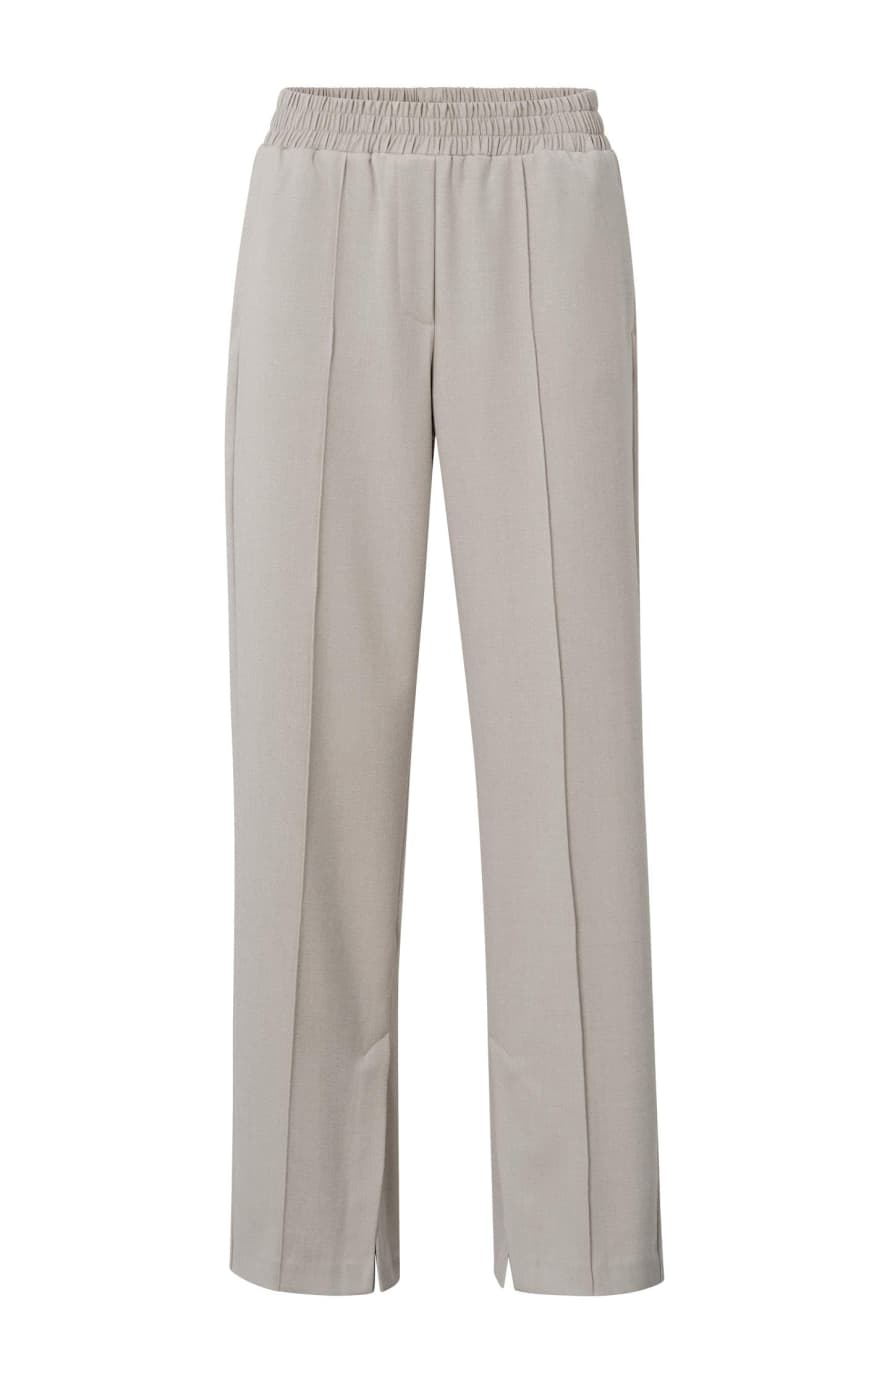 Yaya Soft Woven Wide Leg Trousers, With Elastic Waist And Slits - Silver Beige